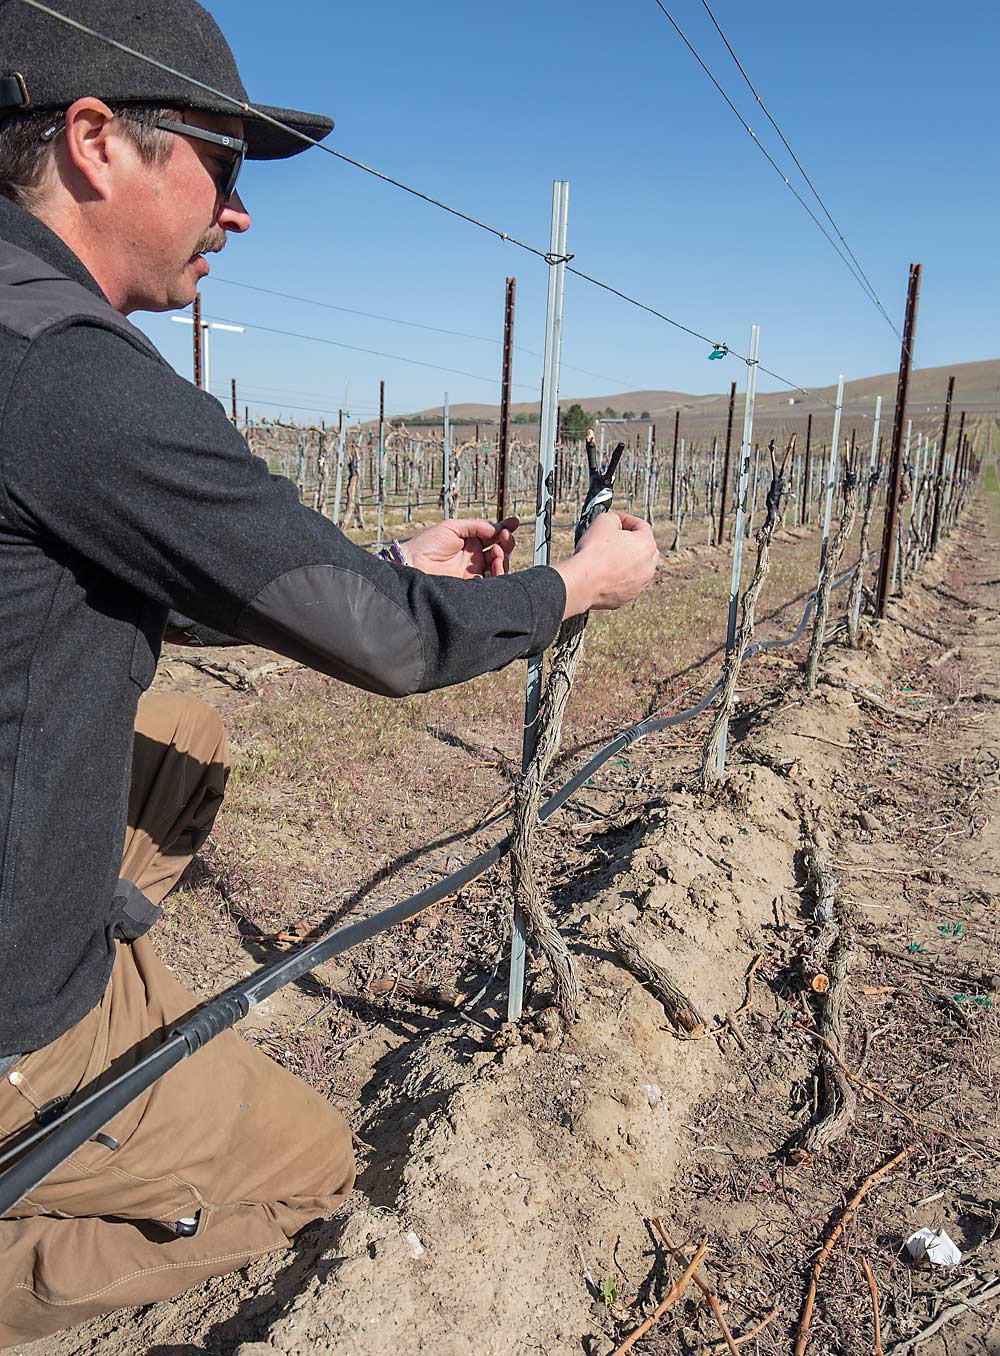 Justin Lyon of Boushey Vineyards checks on the new grafts. Looking at the sealant for air pockets, removing suckers and scoring below the grafts to divert sap flow all help set up the grafted vines for success, Boushey said at the Washington State Grape Society meeting in November. (TJ Mullinax/Good Fruit Grower)